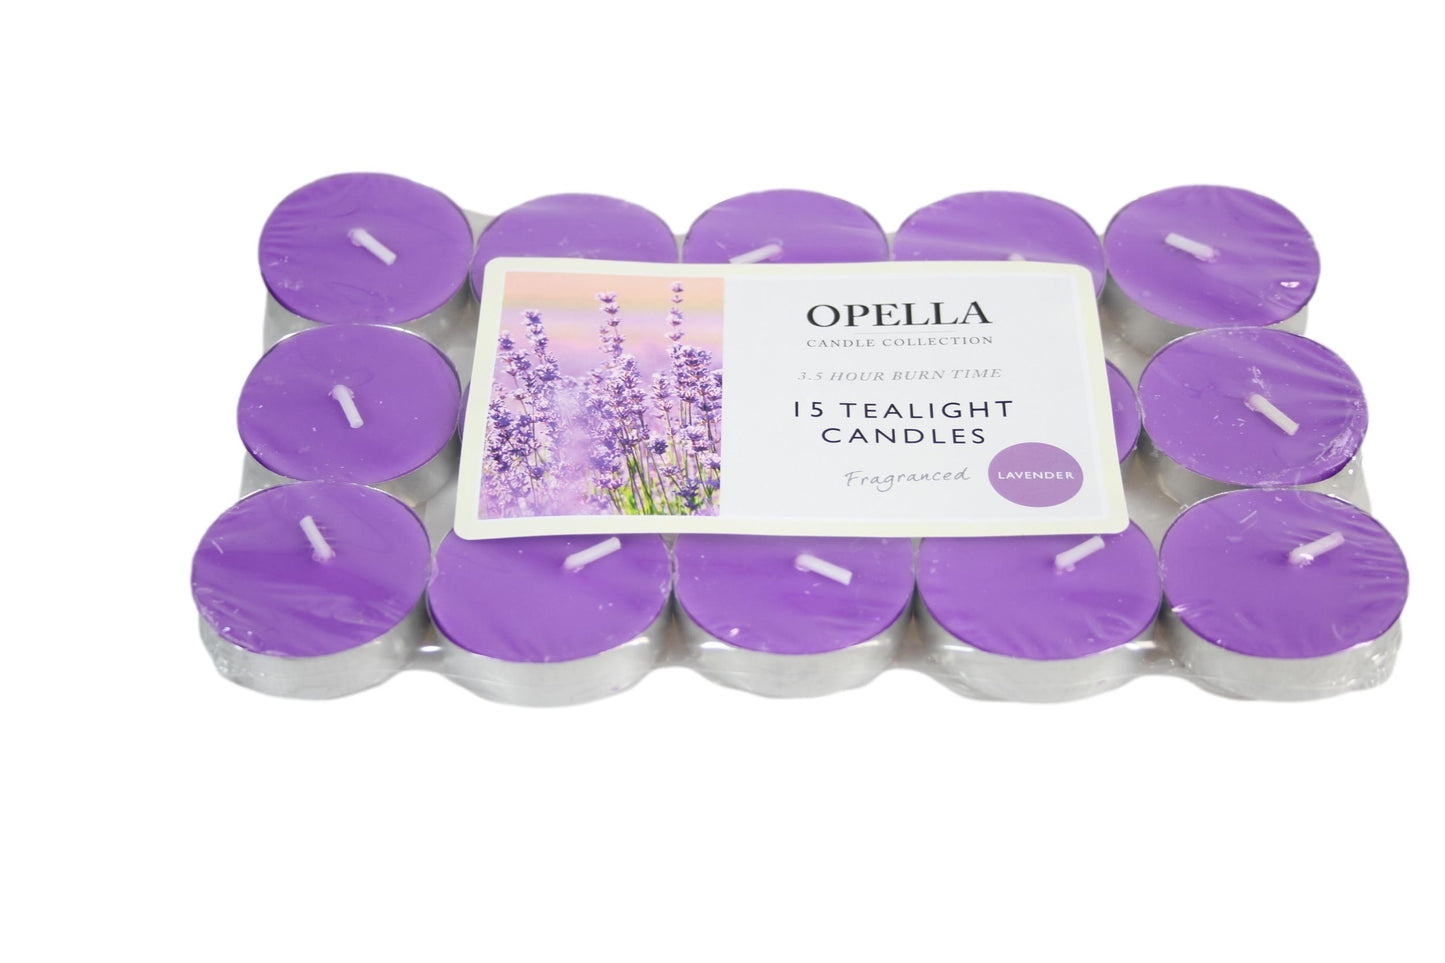 Scented Opella Lavender 12 Tealight Candles 3.5 Hour Burn Time CD001L (Parcel Rate)